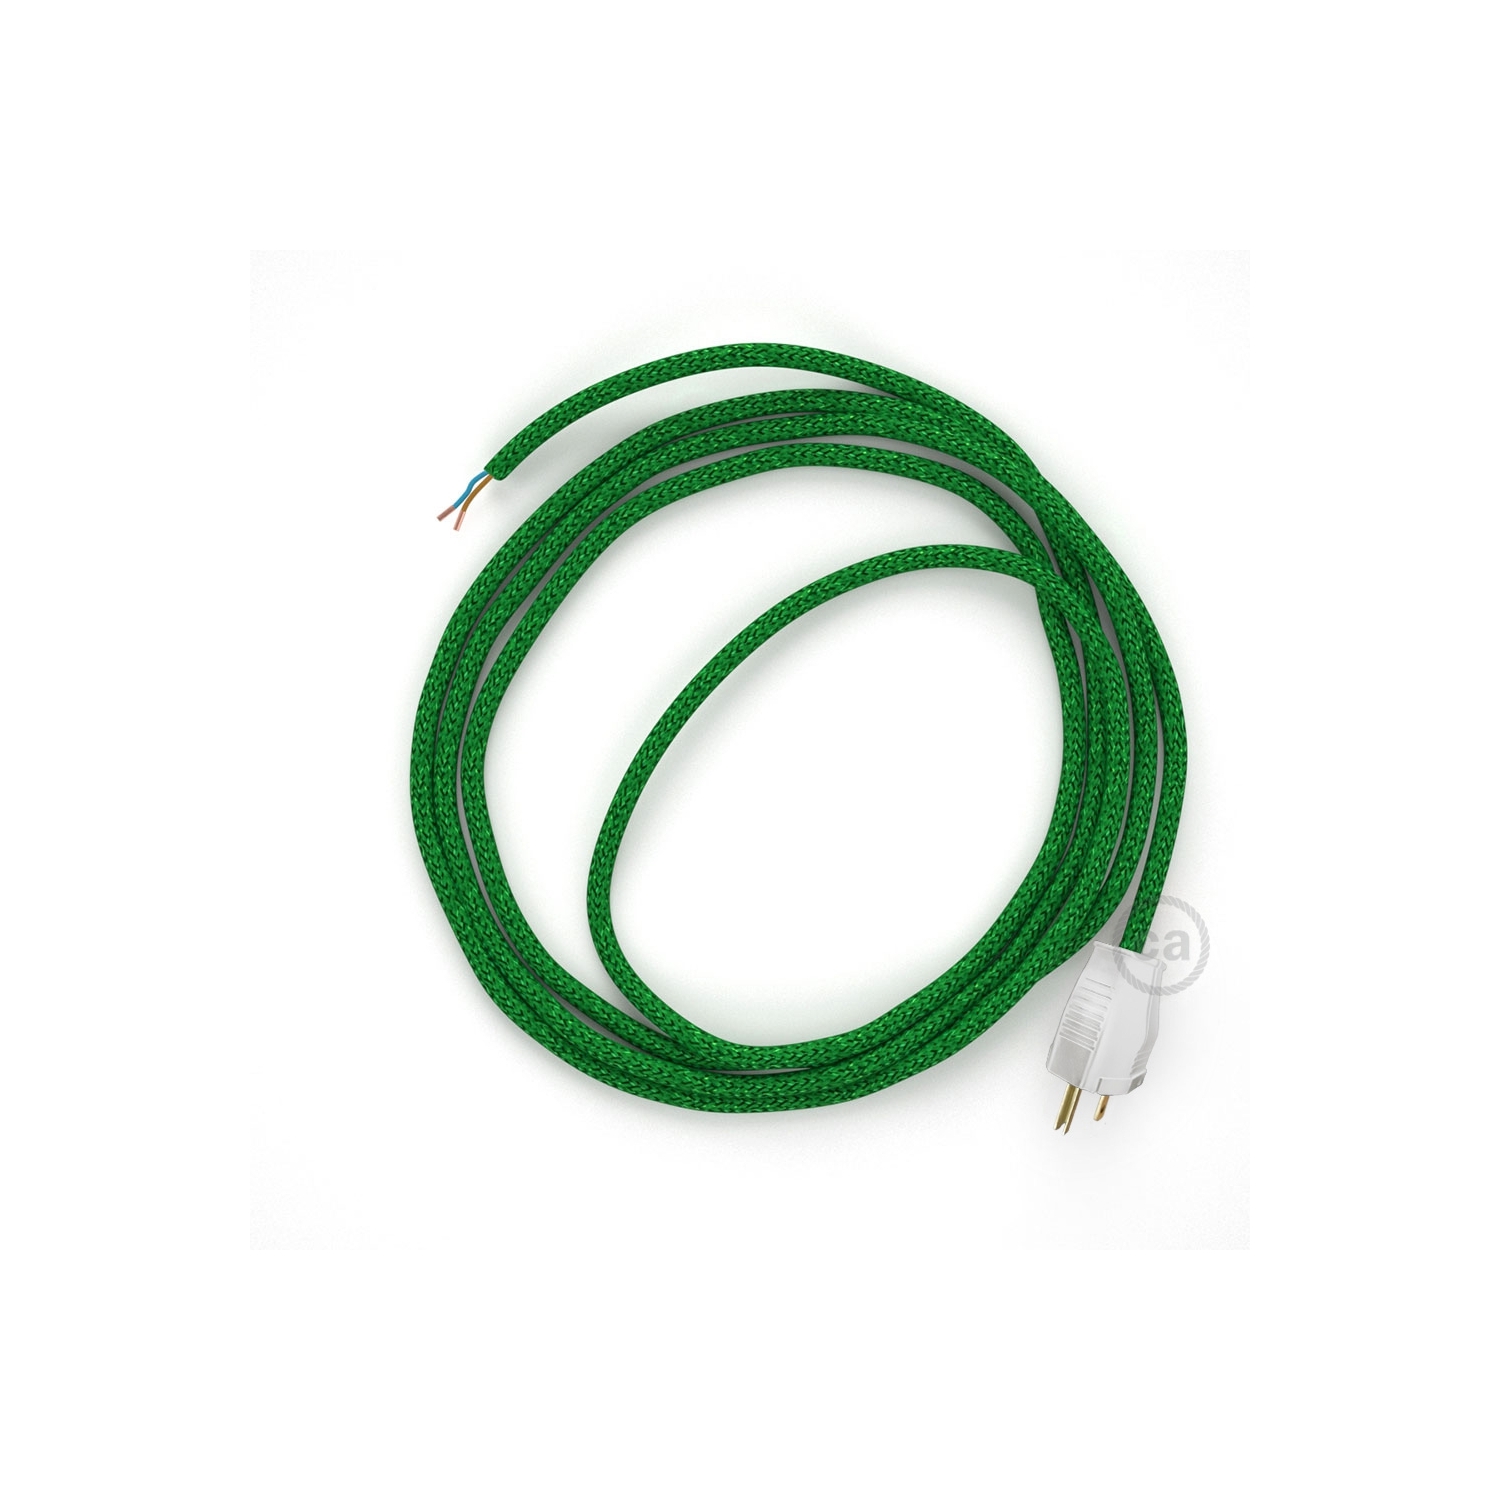 Cord-set - RL06 Green Glitter Covered Round Cable